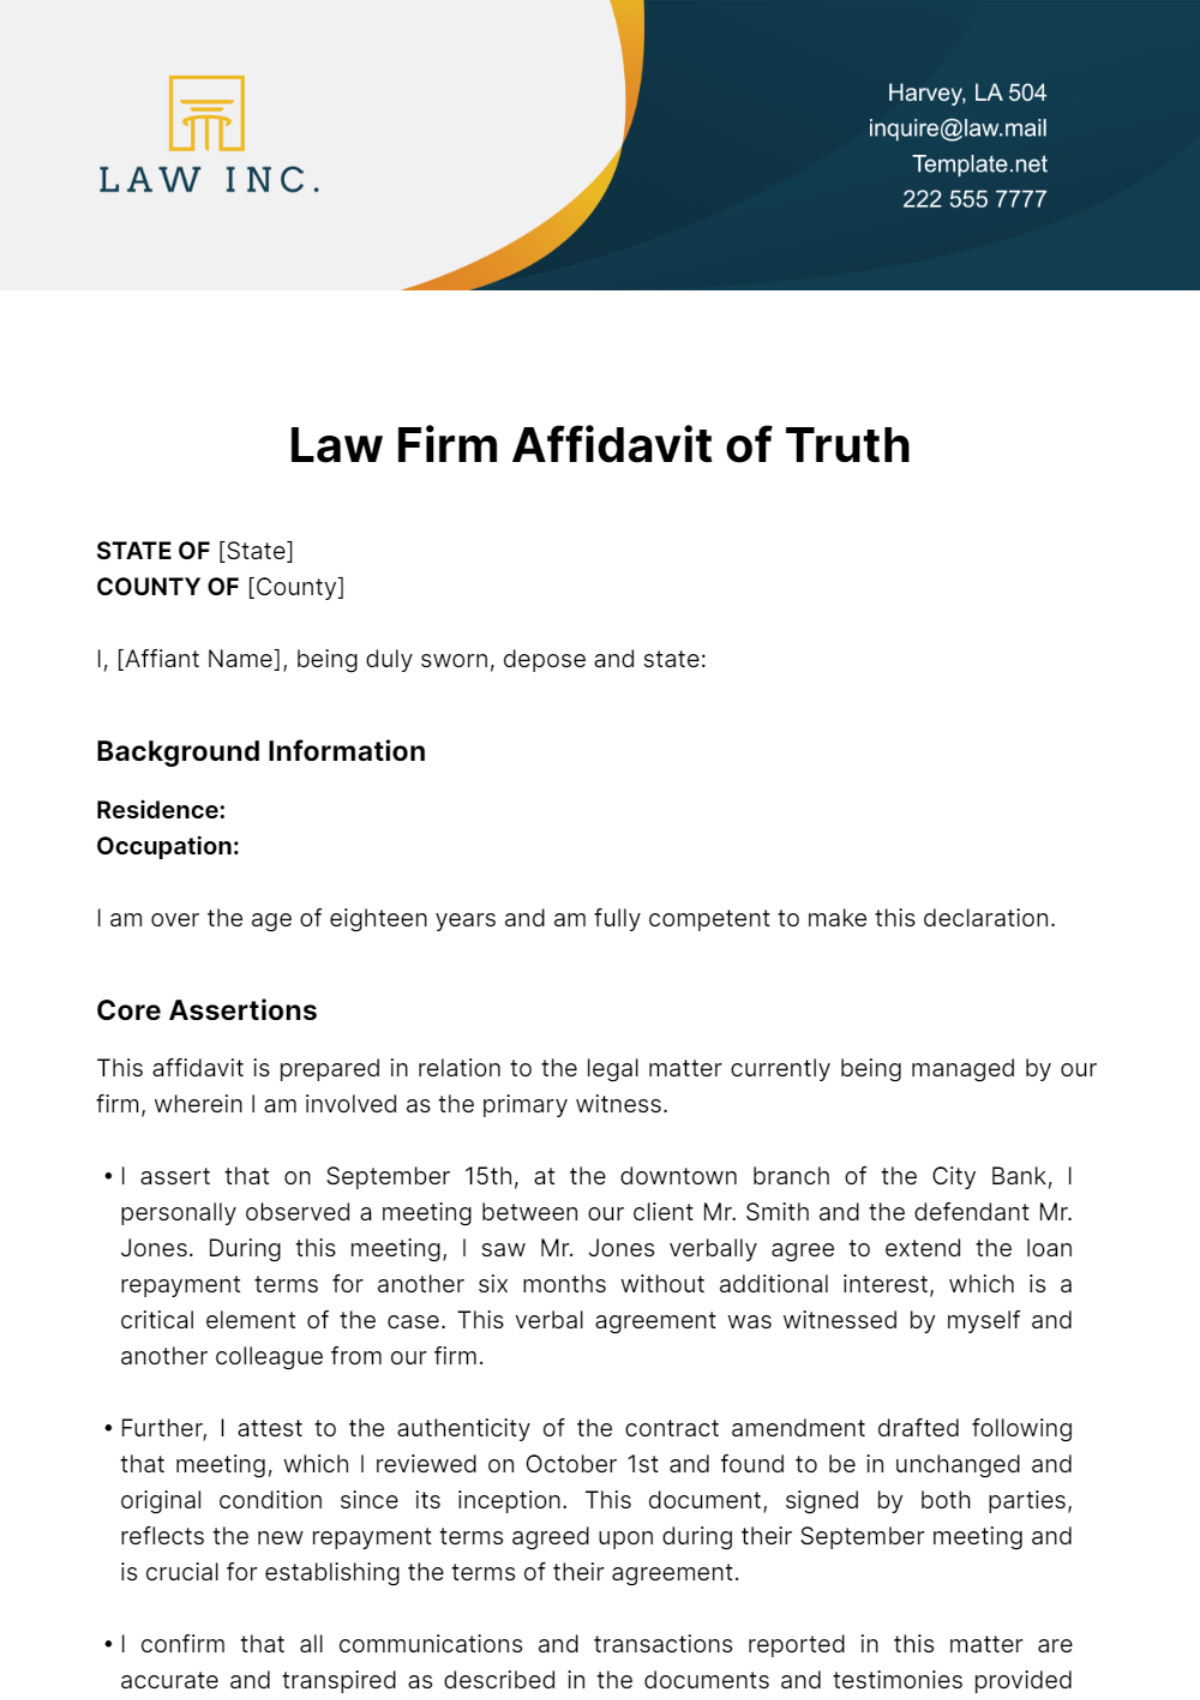 Law Firm Affidavit of Truth Template